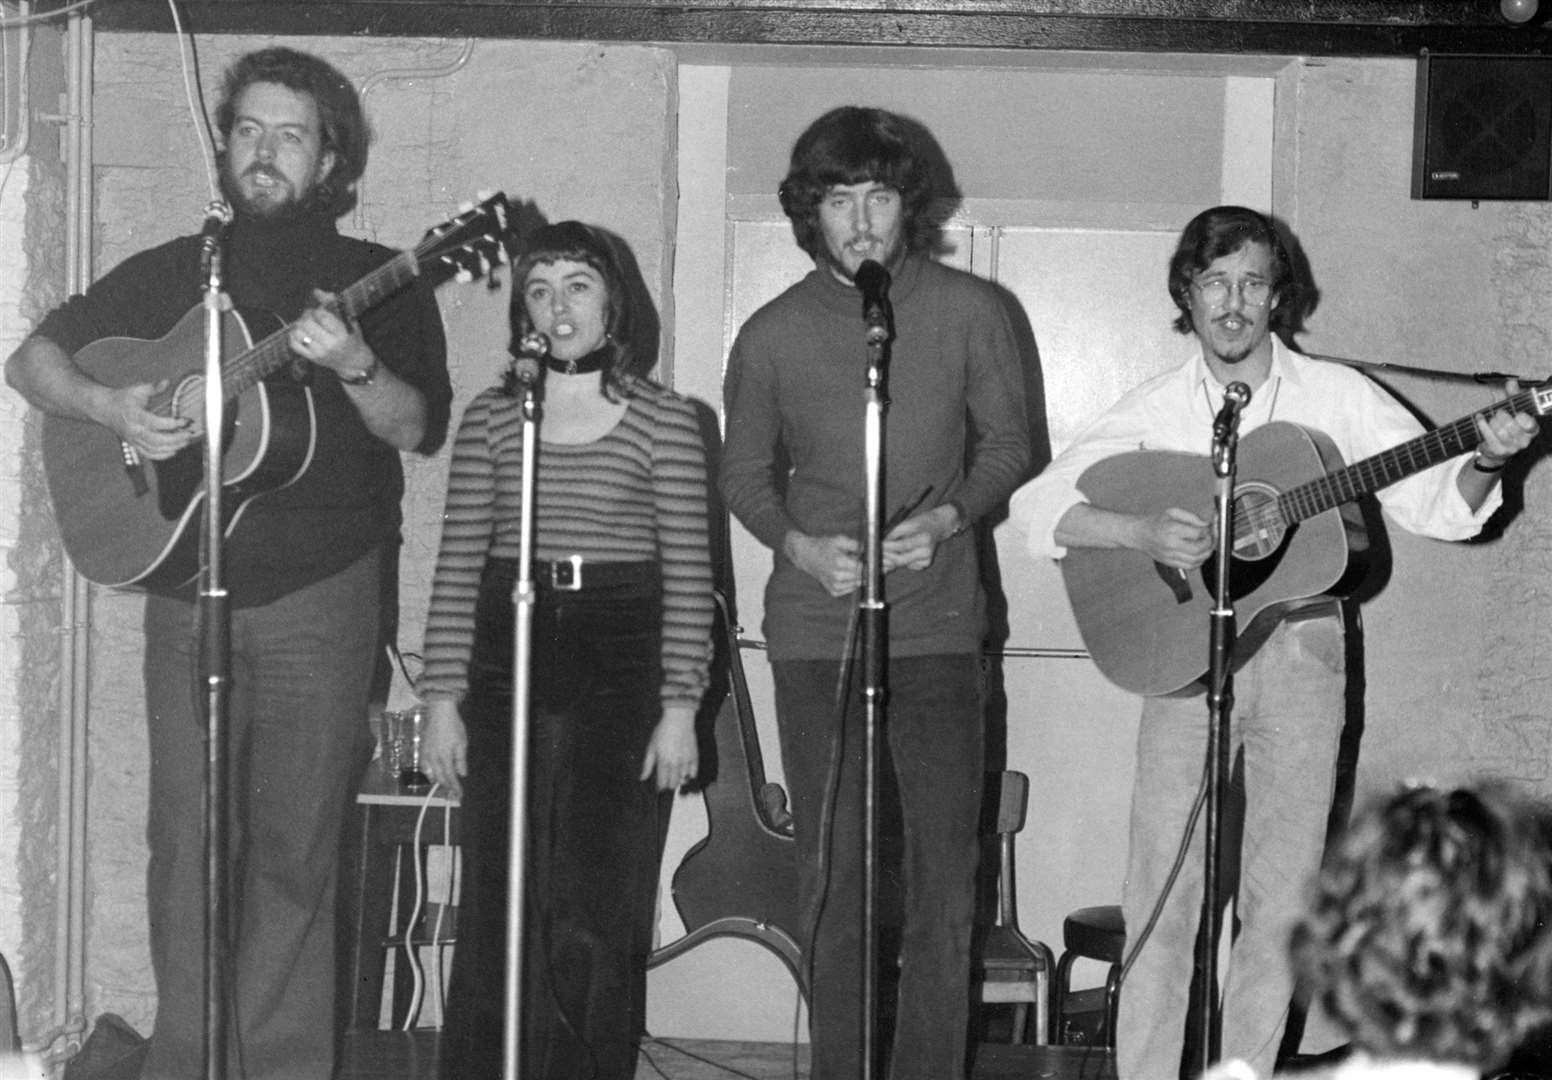 Mirk playing in the Barn at the Viewfirth folk festival in 1979 (Ian Sinclair, Margie Sinclair, Kevin Maclean, Ray Crompton). Jack Selby Collection / Thurso Heritage Society